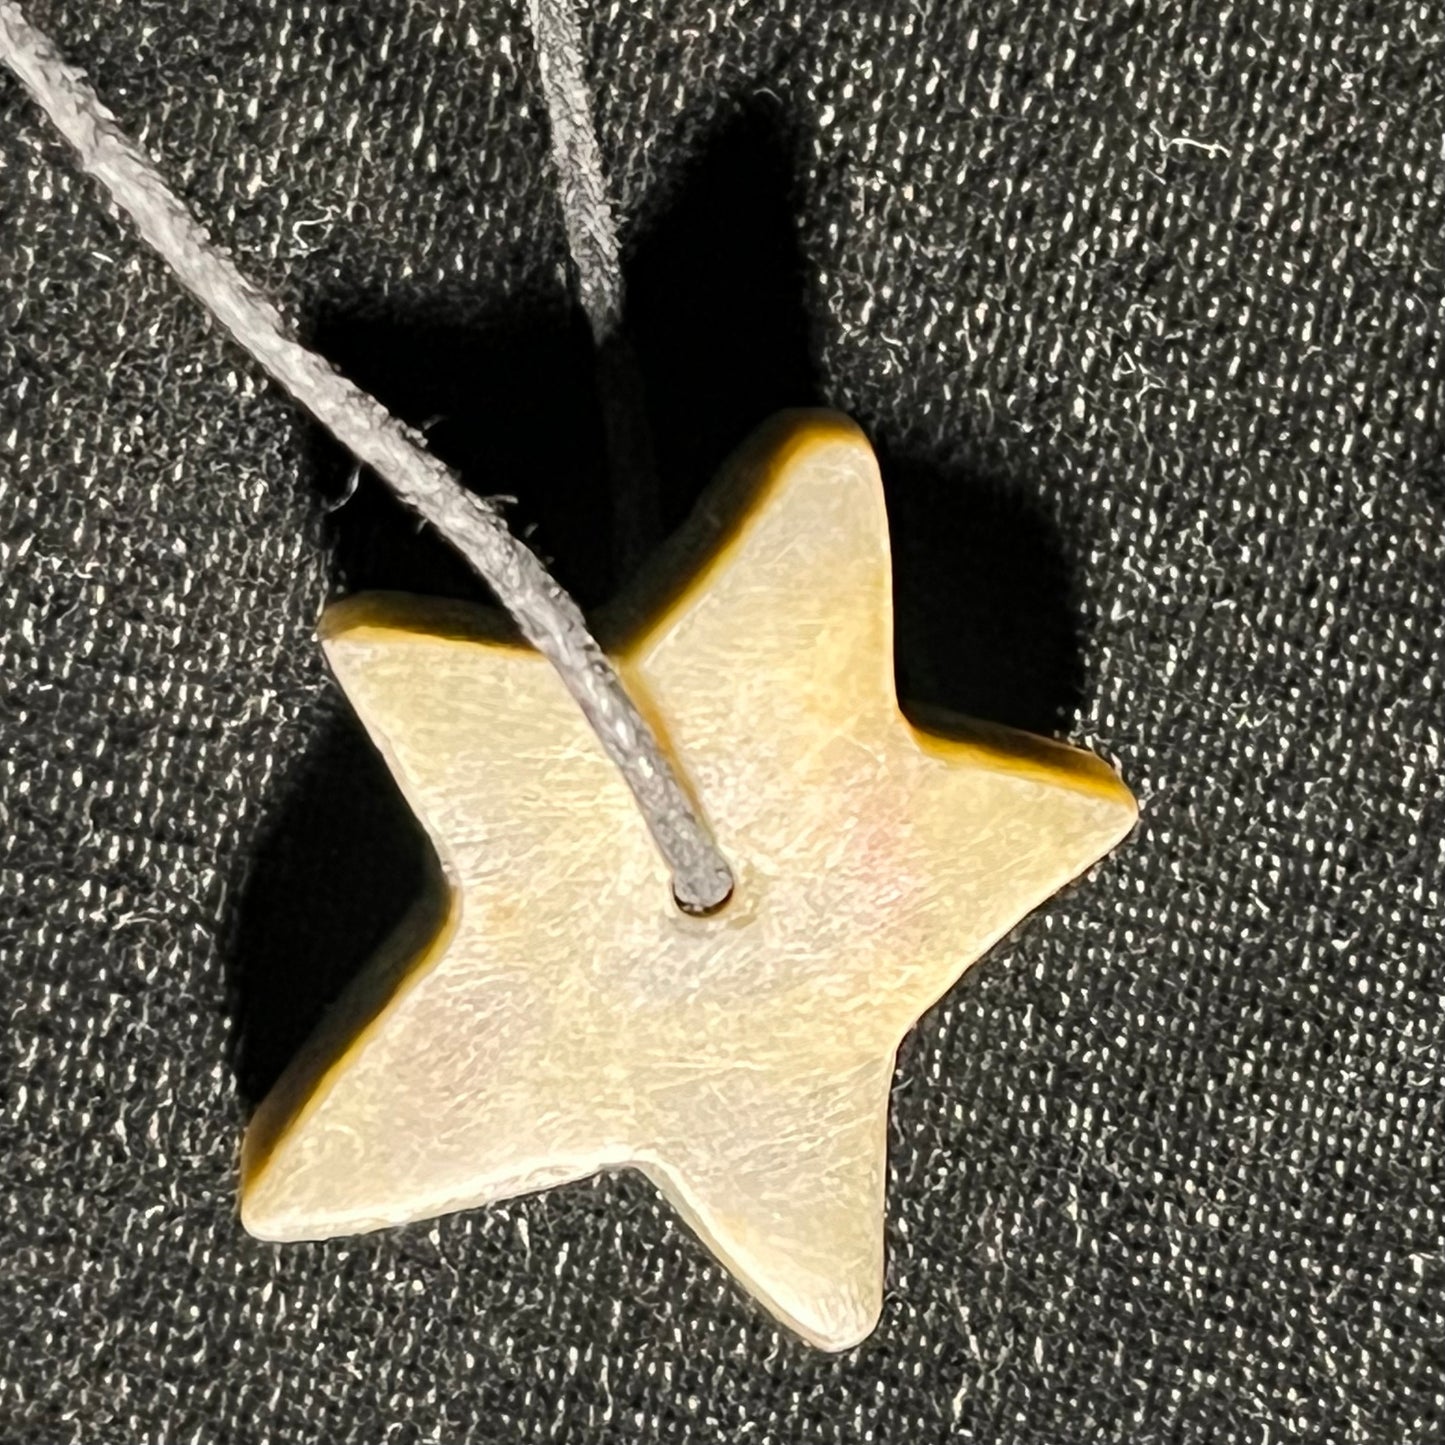 Be Allstar and create your own pendant, necklace star in our Daly art class in Whistler BC